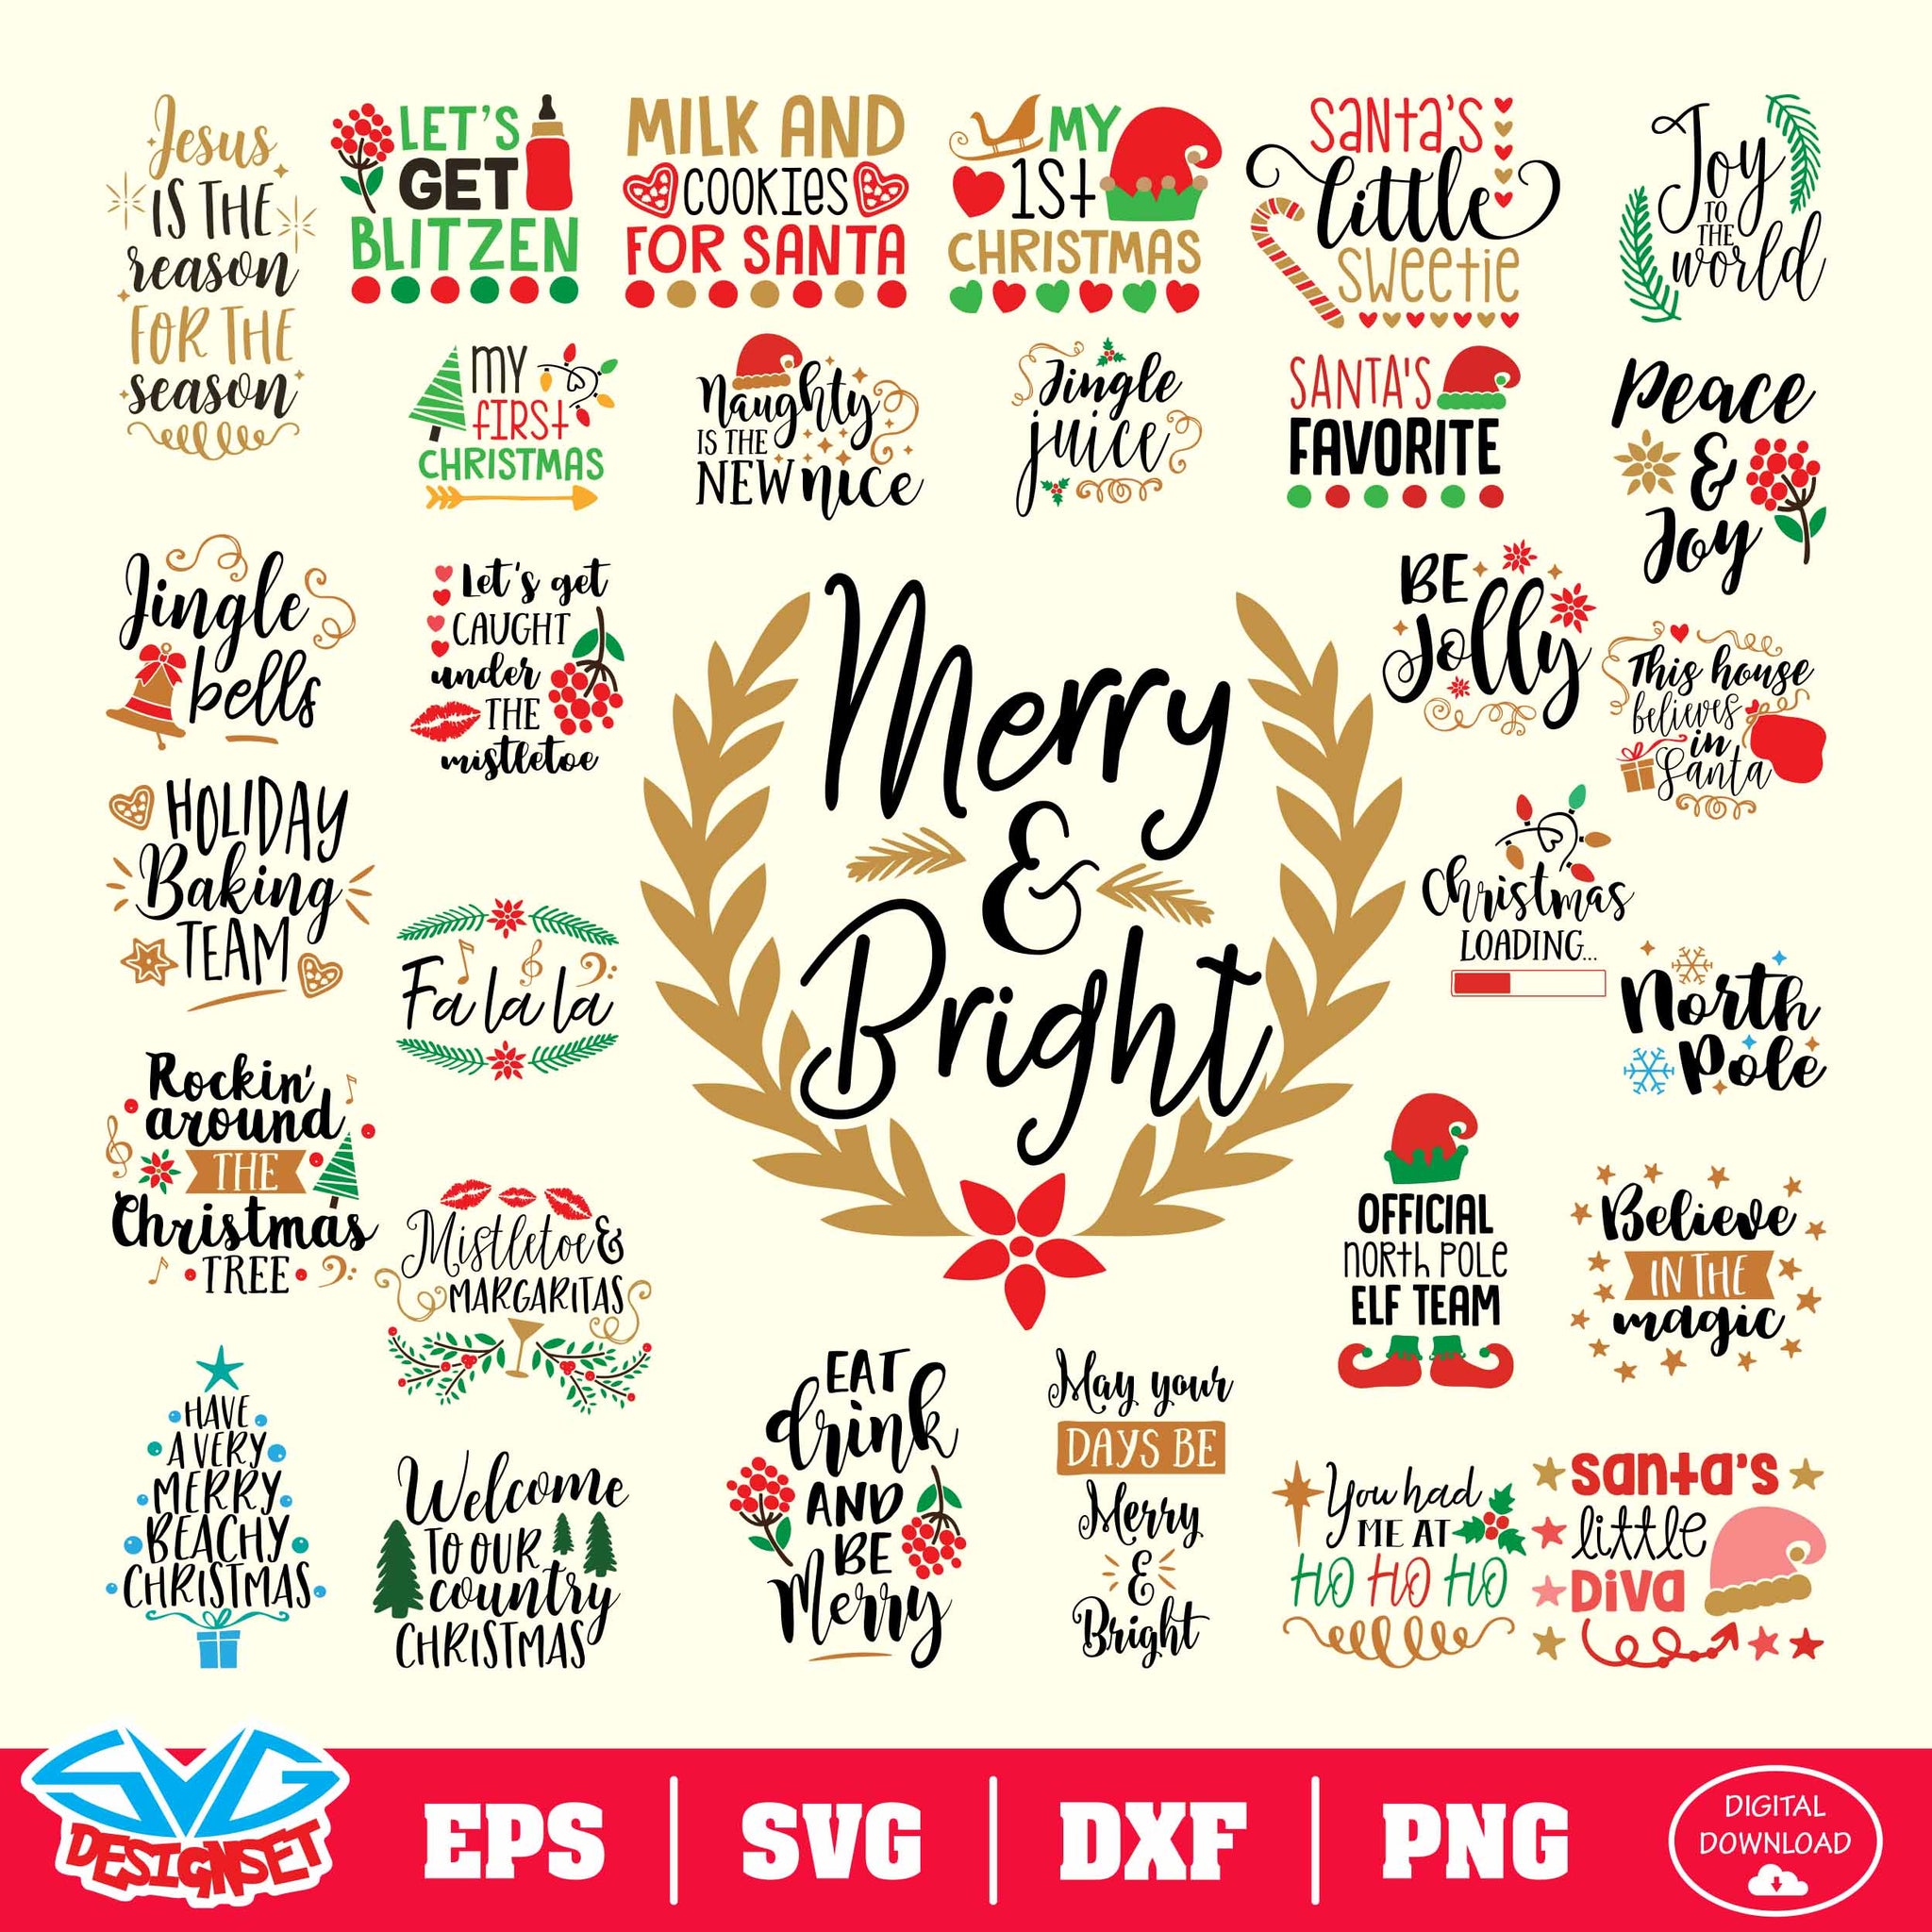 Christmas Bundle Svg, Dxf, Eps, Png, Clipart, Silhouette and Cutfiles #010 - SVGDesignSets